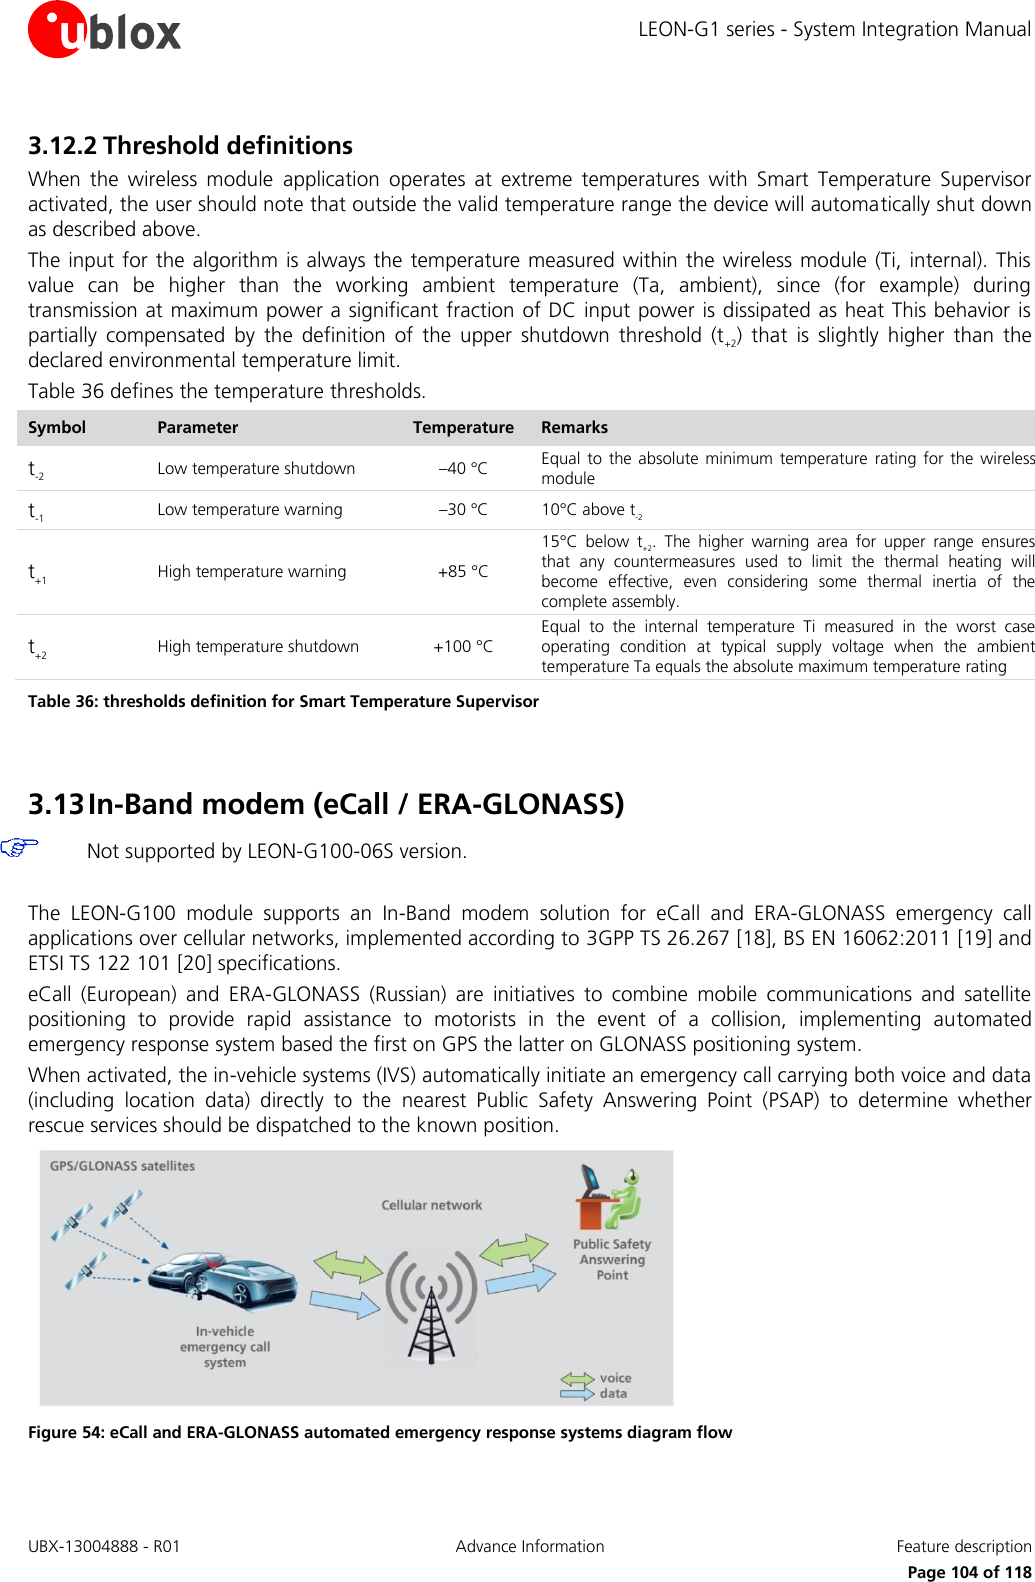 LEON-G1 series - System Integration Manual UBX-13004888 - R01  Advance Information  Feature description      Page 104 of 118 3.12.2 Threshold definitions When  the  wireless  module  application  operates  at  extreme  temperatures  with  Smart  Temperature  Supervisor activated, the user should note that outside the valid temperature range the device will automatically shut down as described above. The input for  the algorithm  is always the temperature measured within the  wireless module (Ti, internal). This value  can  be  higher  than  the  working  ambient  temperature  (Ta,  ambient),  since  (for  example)  during transmission at maximum power a significant fraction of DC input power is dissipated as heat This behavior is partially  compensated  by  the  definition  of  the  upper  shutdown  threshold  (t+2)  that  is  slightly  higher  than  the declared environmental temperature limit. Table 36 defines the temperature thresholds. Symbol Parameter Temperature Remarks t-2 Low temperature shutdown –40 °C Equal  to the absolute  minimum temperature  rating for the  wireless module t-1 Low temperature warning –30 °C 10°C above t-2 t+1 High temperature warning +85 °C 15°C  below  t+2.  The  higher  warning  area  for  upper  range  ensures that  any  countermeasures  used  to  limit  the  thermal  heating  will become  effective,  even  considering  some  thermal  inertia  of  the complete assembly. t+2 High temperature shutdown +100 °C Equal  to  the  internal  temperature  Ti  measured  in  the  worst  case operating  condition  at  typical  supply  voltage  when  the  ambient temperature Ta equals the absolute maximum temperature rating Table 36: thresholds definition for Smart Temperature Supervisor  3.13 In-Band modem (eCall / ERA-GLONASS)  Not supported by LEON-G100-06S version.  The  LEON-G100  module  supports  an  In-Band  modem  solution  for  eCall  and  ERA-GLONASS  emergency  call applications over cellular networks, implemented according to 3GPP TS 26.267 [18], BS EN 16062:2011 [19] and ETSI TS 122 101 [20] specifications. eCall  (European)  and  ERA-GLONASS  (Russian)  are  initiatives  to  combine  mobile  communications  and  satellite positioning  to  provide  rapid  assistance  to  motorists  in  the  event  of  a  collision,  implementing  automated emergency response system based the first on GPS the latter on GLONASS positioning system. When activated, the in-vehicle systems (IVS) automatically initiate an emergency call carrying both voice and data (including  location  data)  directly  to  the  nearest  Public  Safety  Answering  Point  (PSAP)  to  determine  whether rescue services should be dispatched to the known position.  Figure 54: eCall and ERA-GLONASS automated emergency response systems diagram flow  